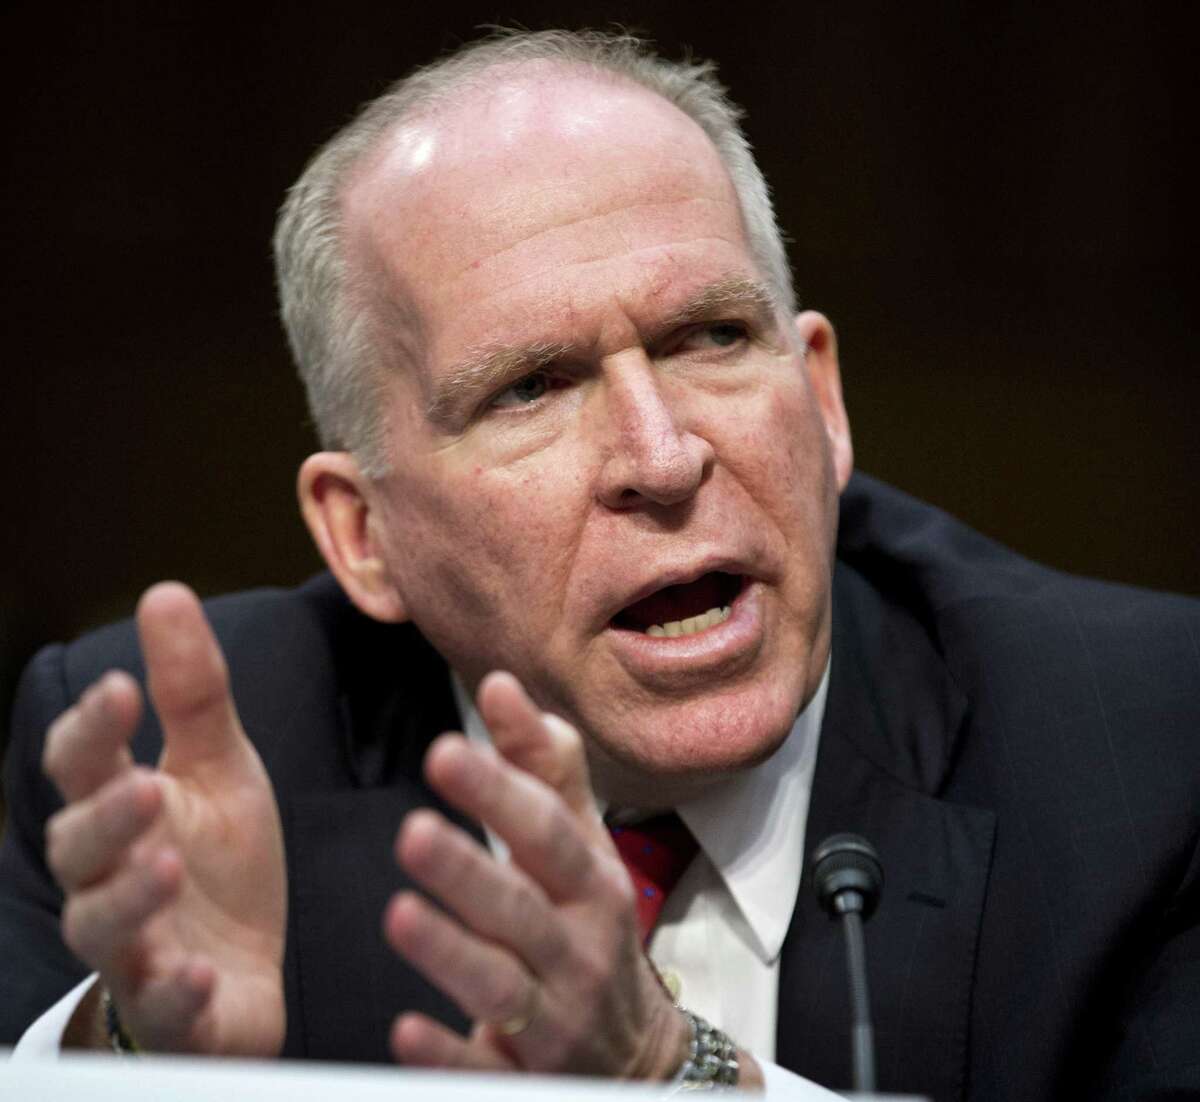 The Senate Intelligence Committee voted 12-3 on Tuesday to confirm John Brennan as CIA director.